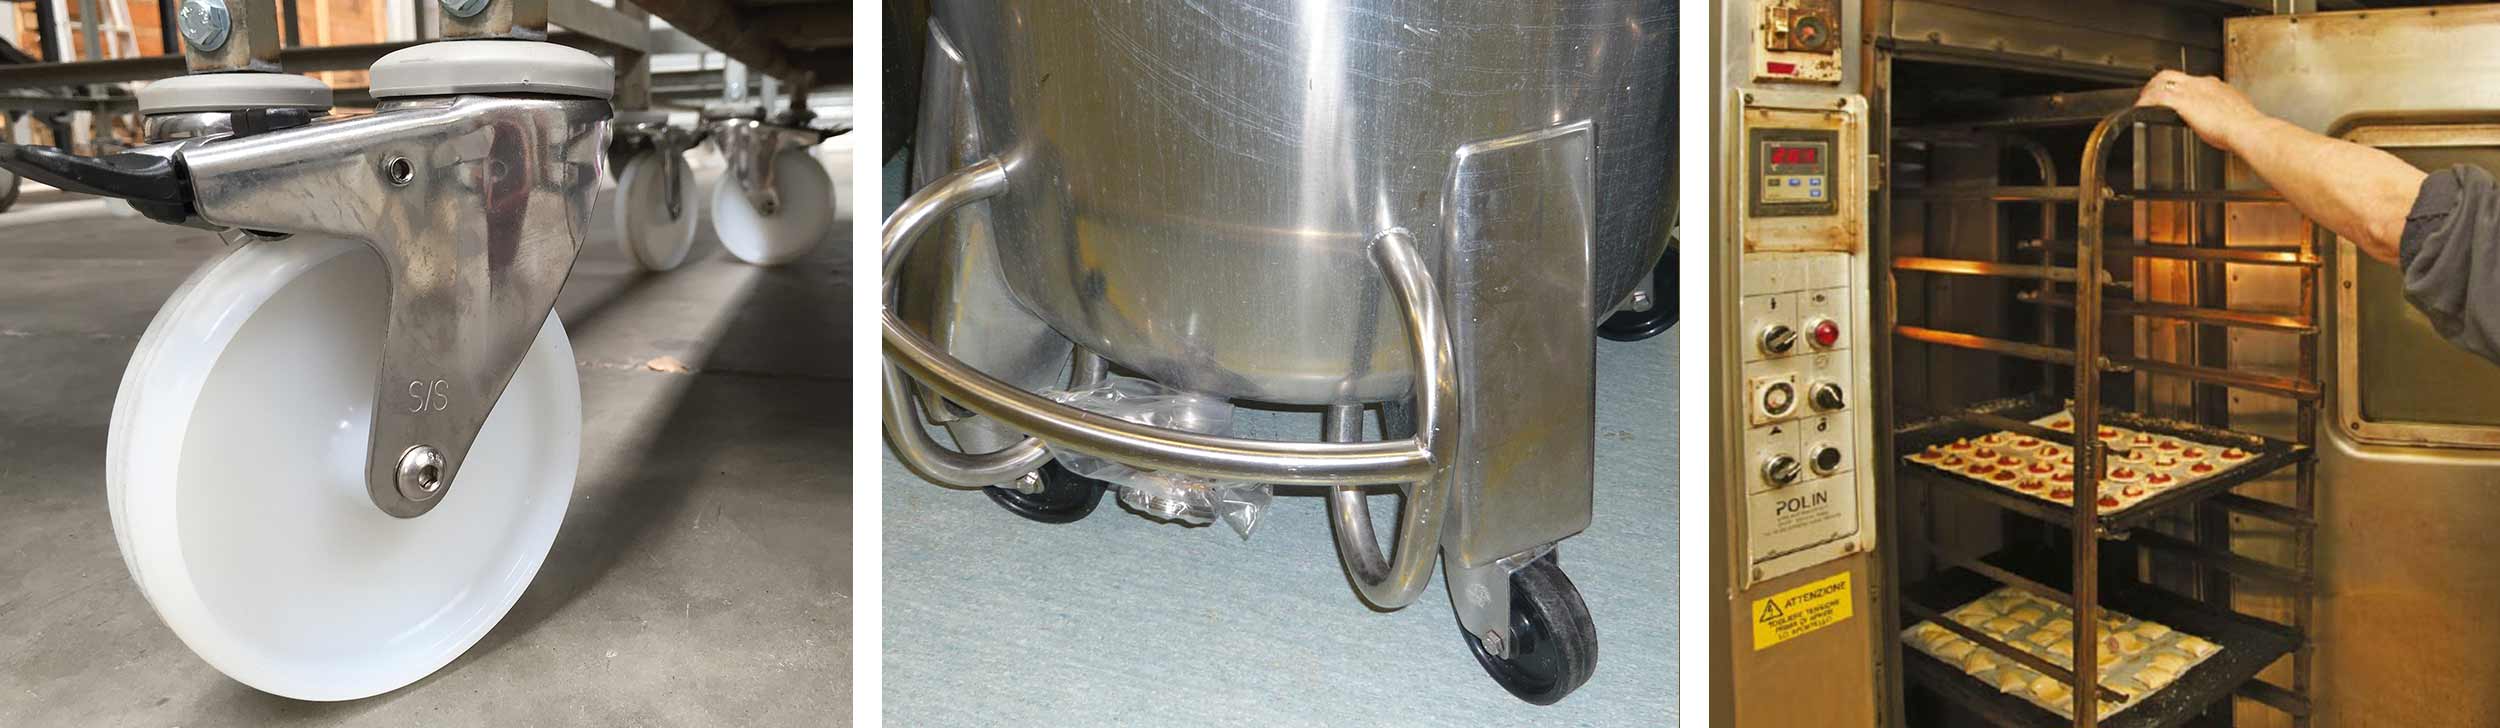 Specialised castors for ovens, freezers, wet areas or corrosive environments